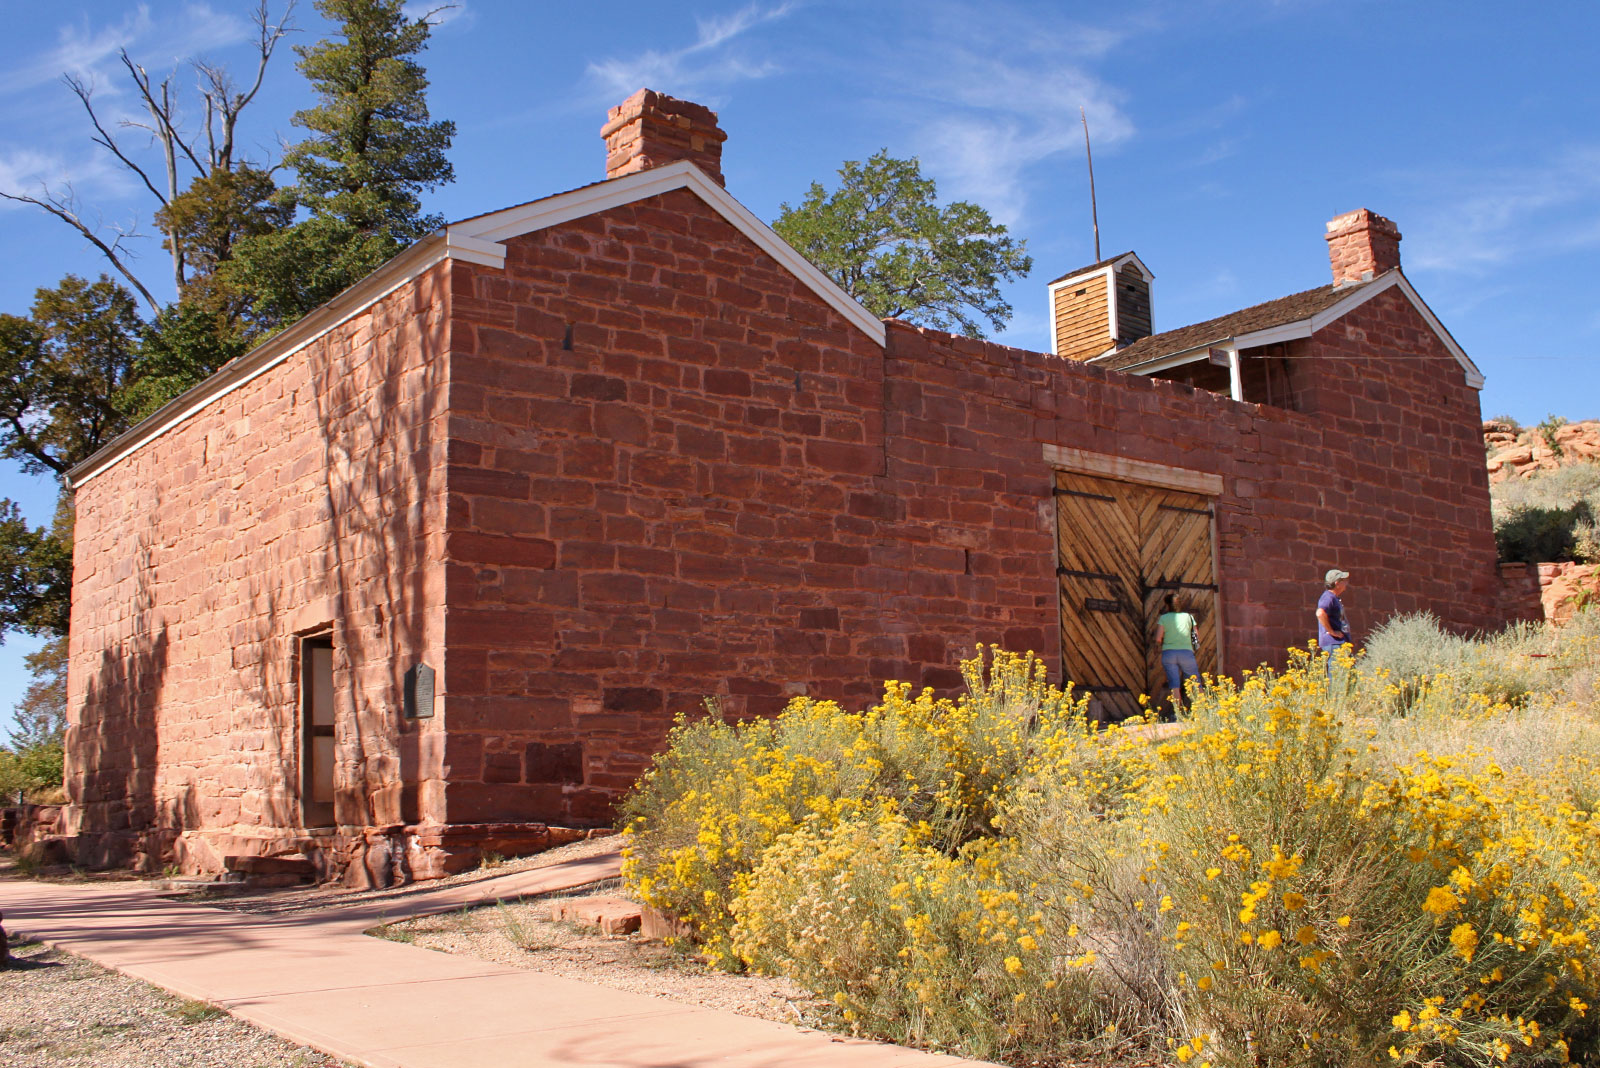 A large sandstone building with large doors at Pipe Springs National Monument near Kanab, Utah